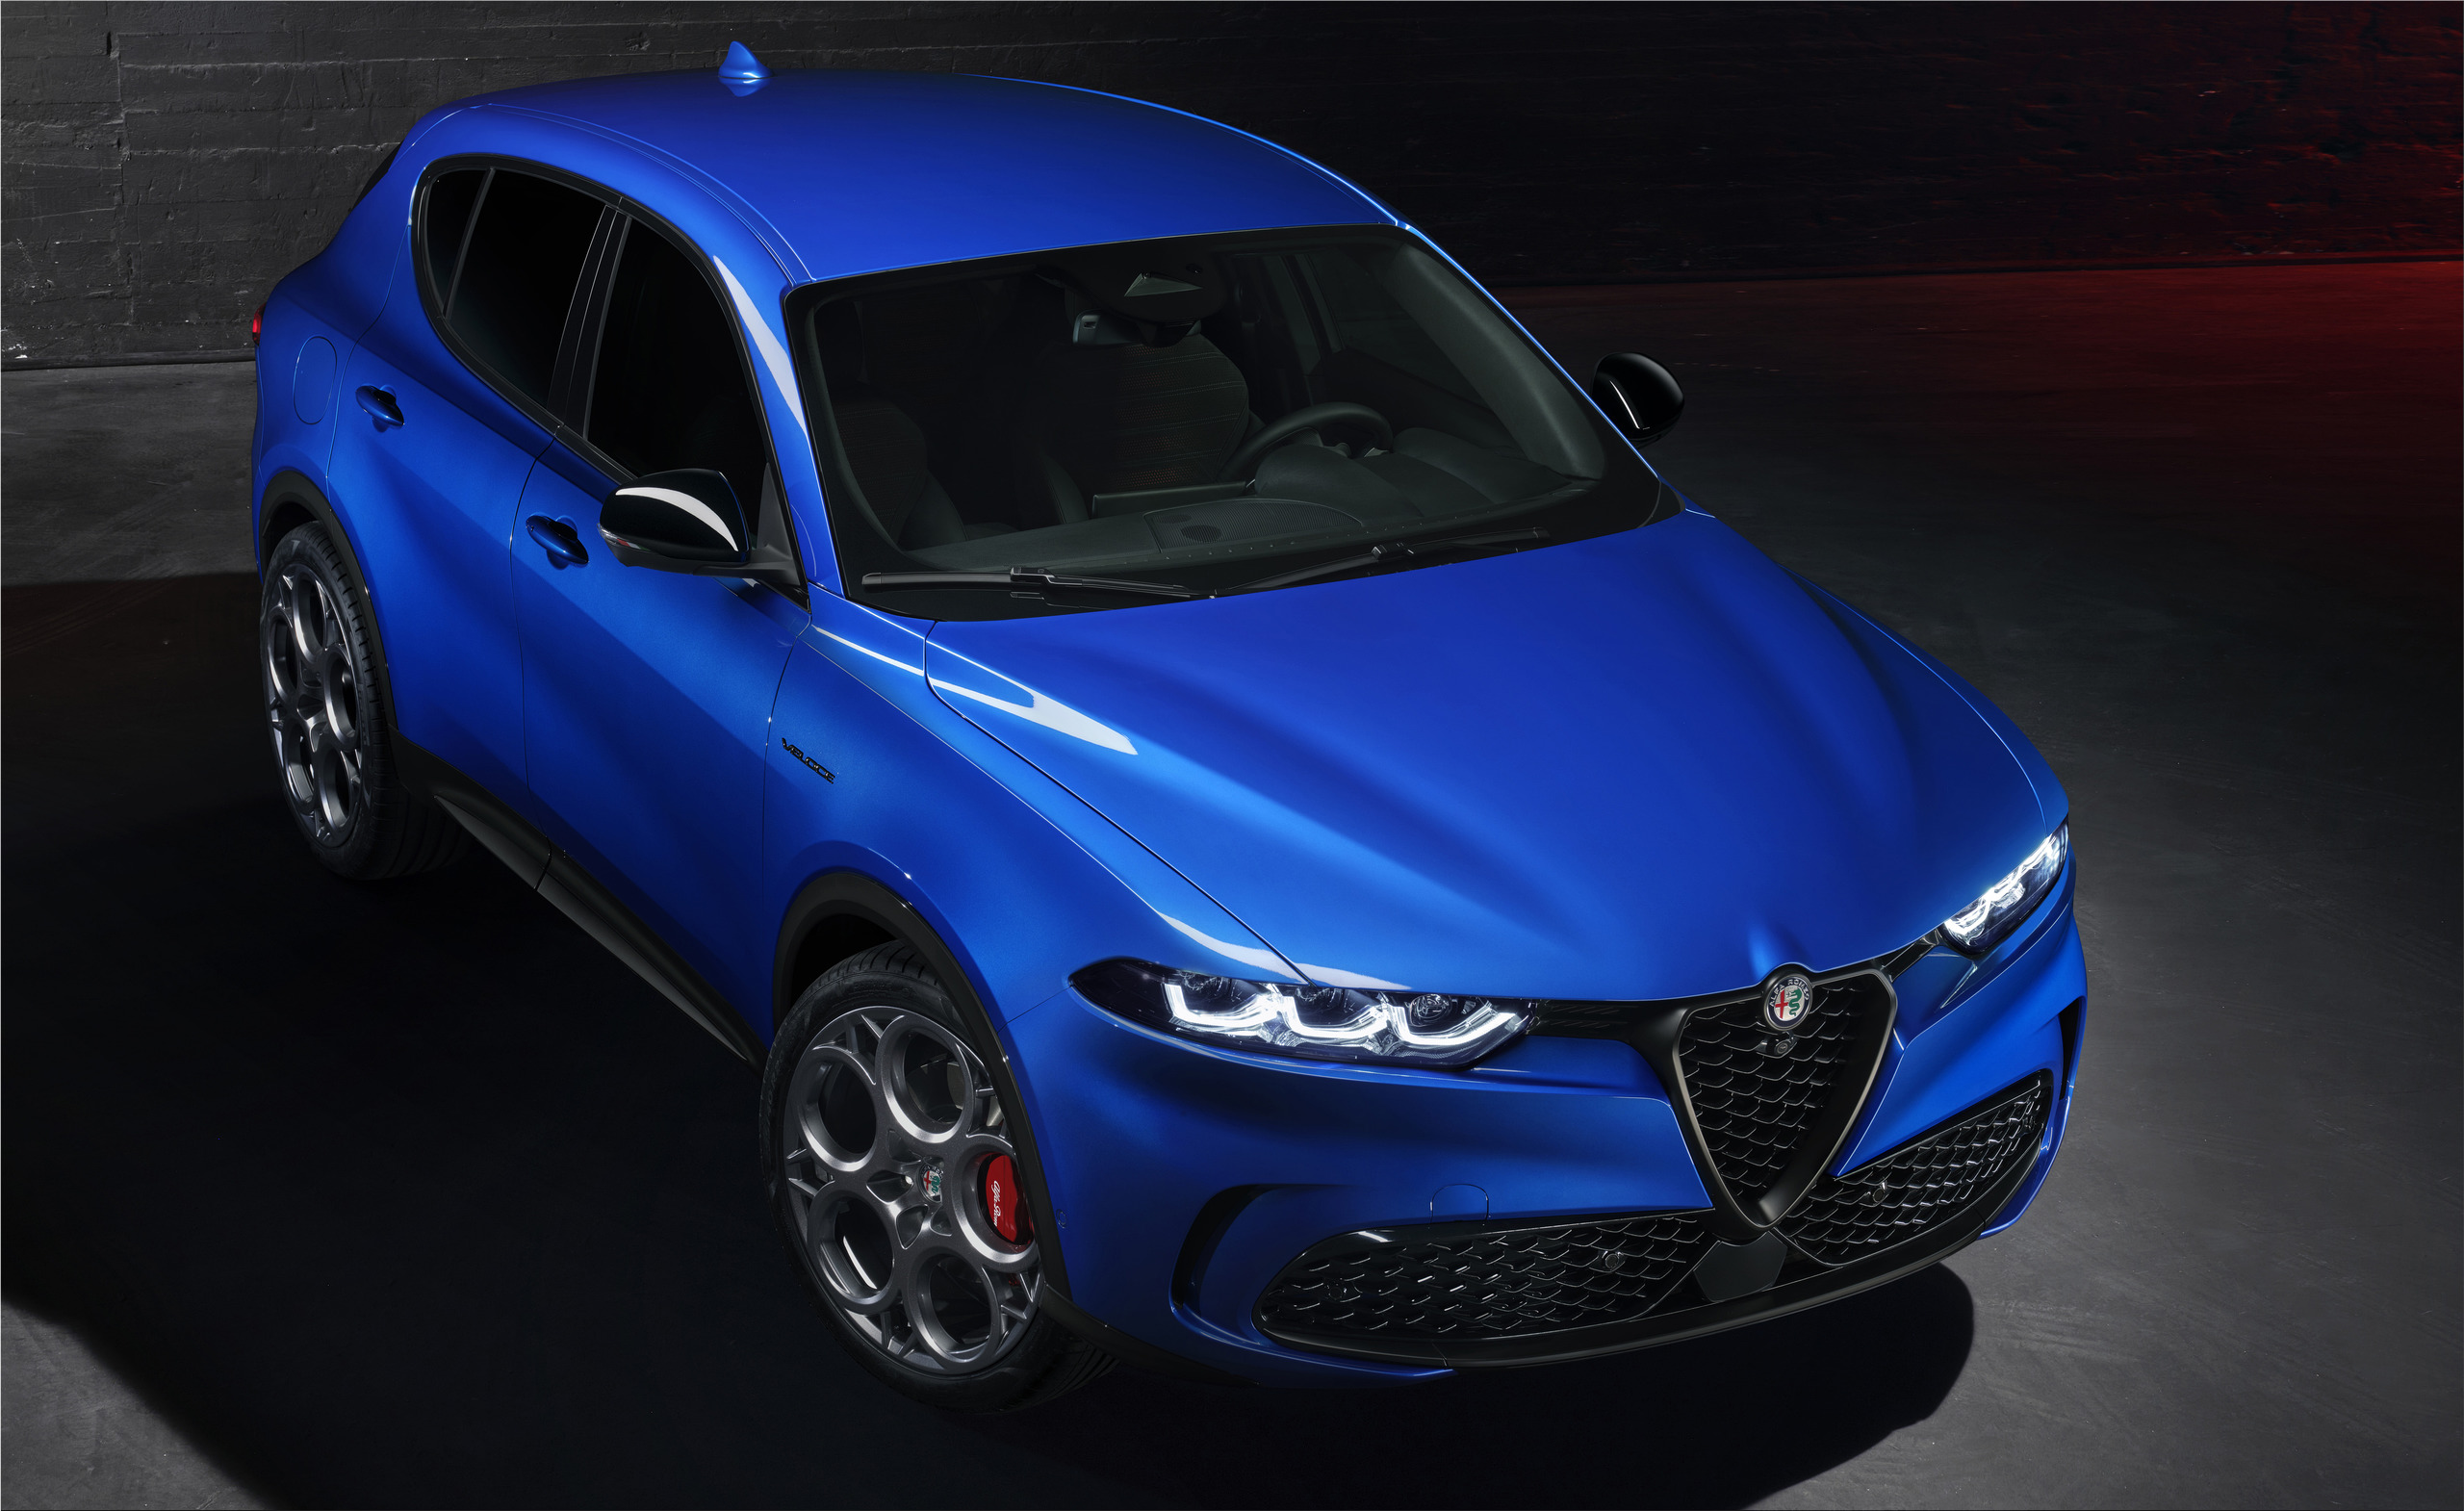 The new Alfa Romeo Tonale PHEV will be available for test drives ...